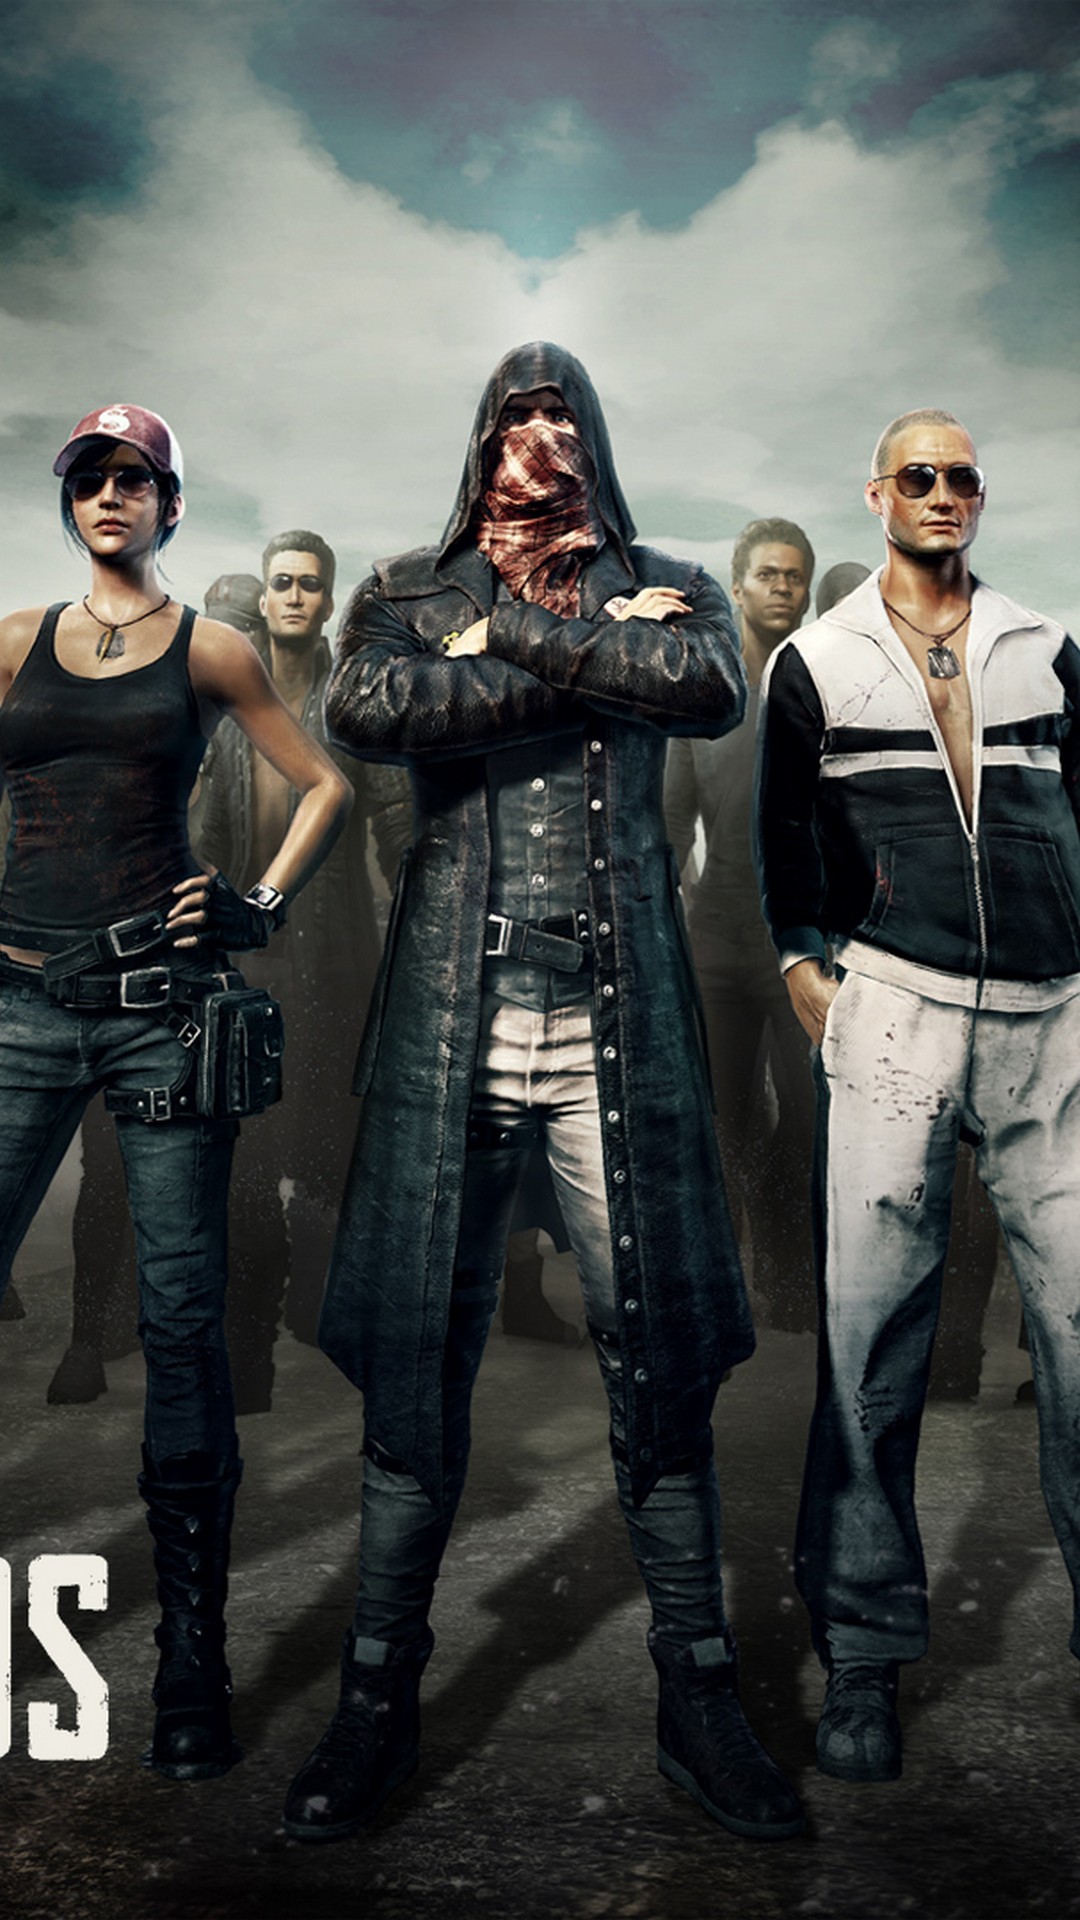 Wallpaper Battle, Soldiers, Weapons, Shot, Game, 2020, PlayerUnknown's  Battlegrounds, PUBG Corporation images for desktop, section игры - download